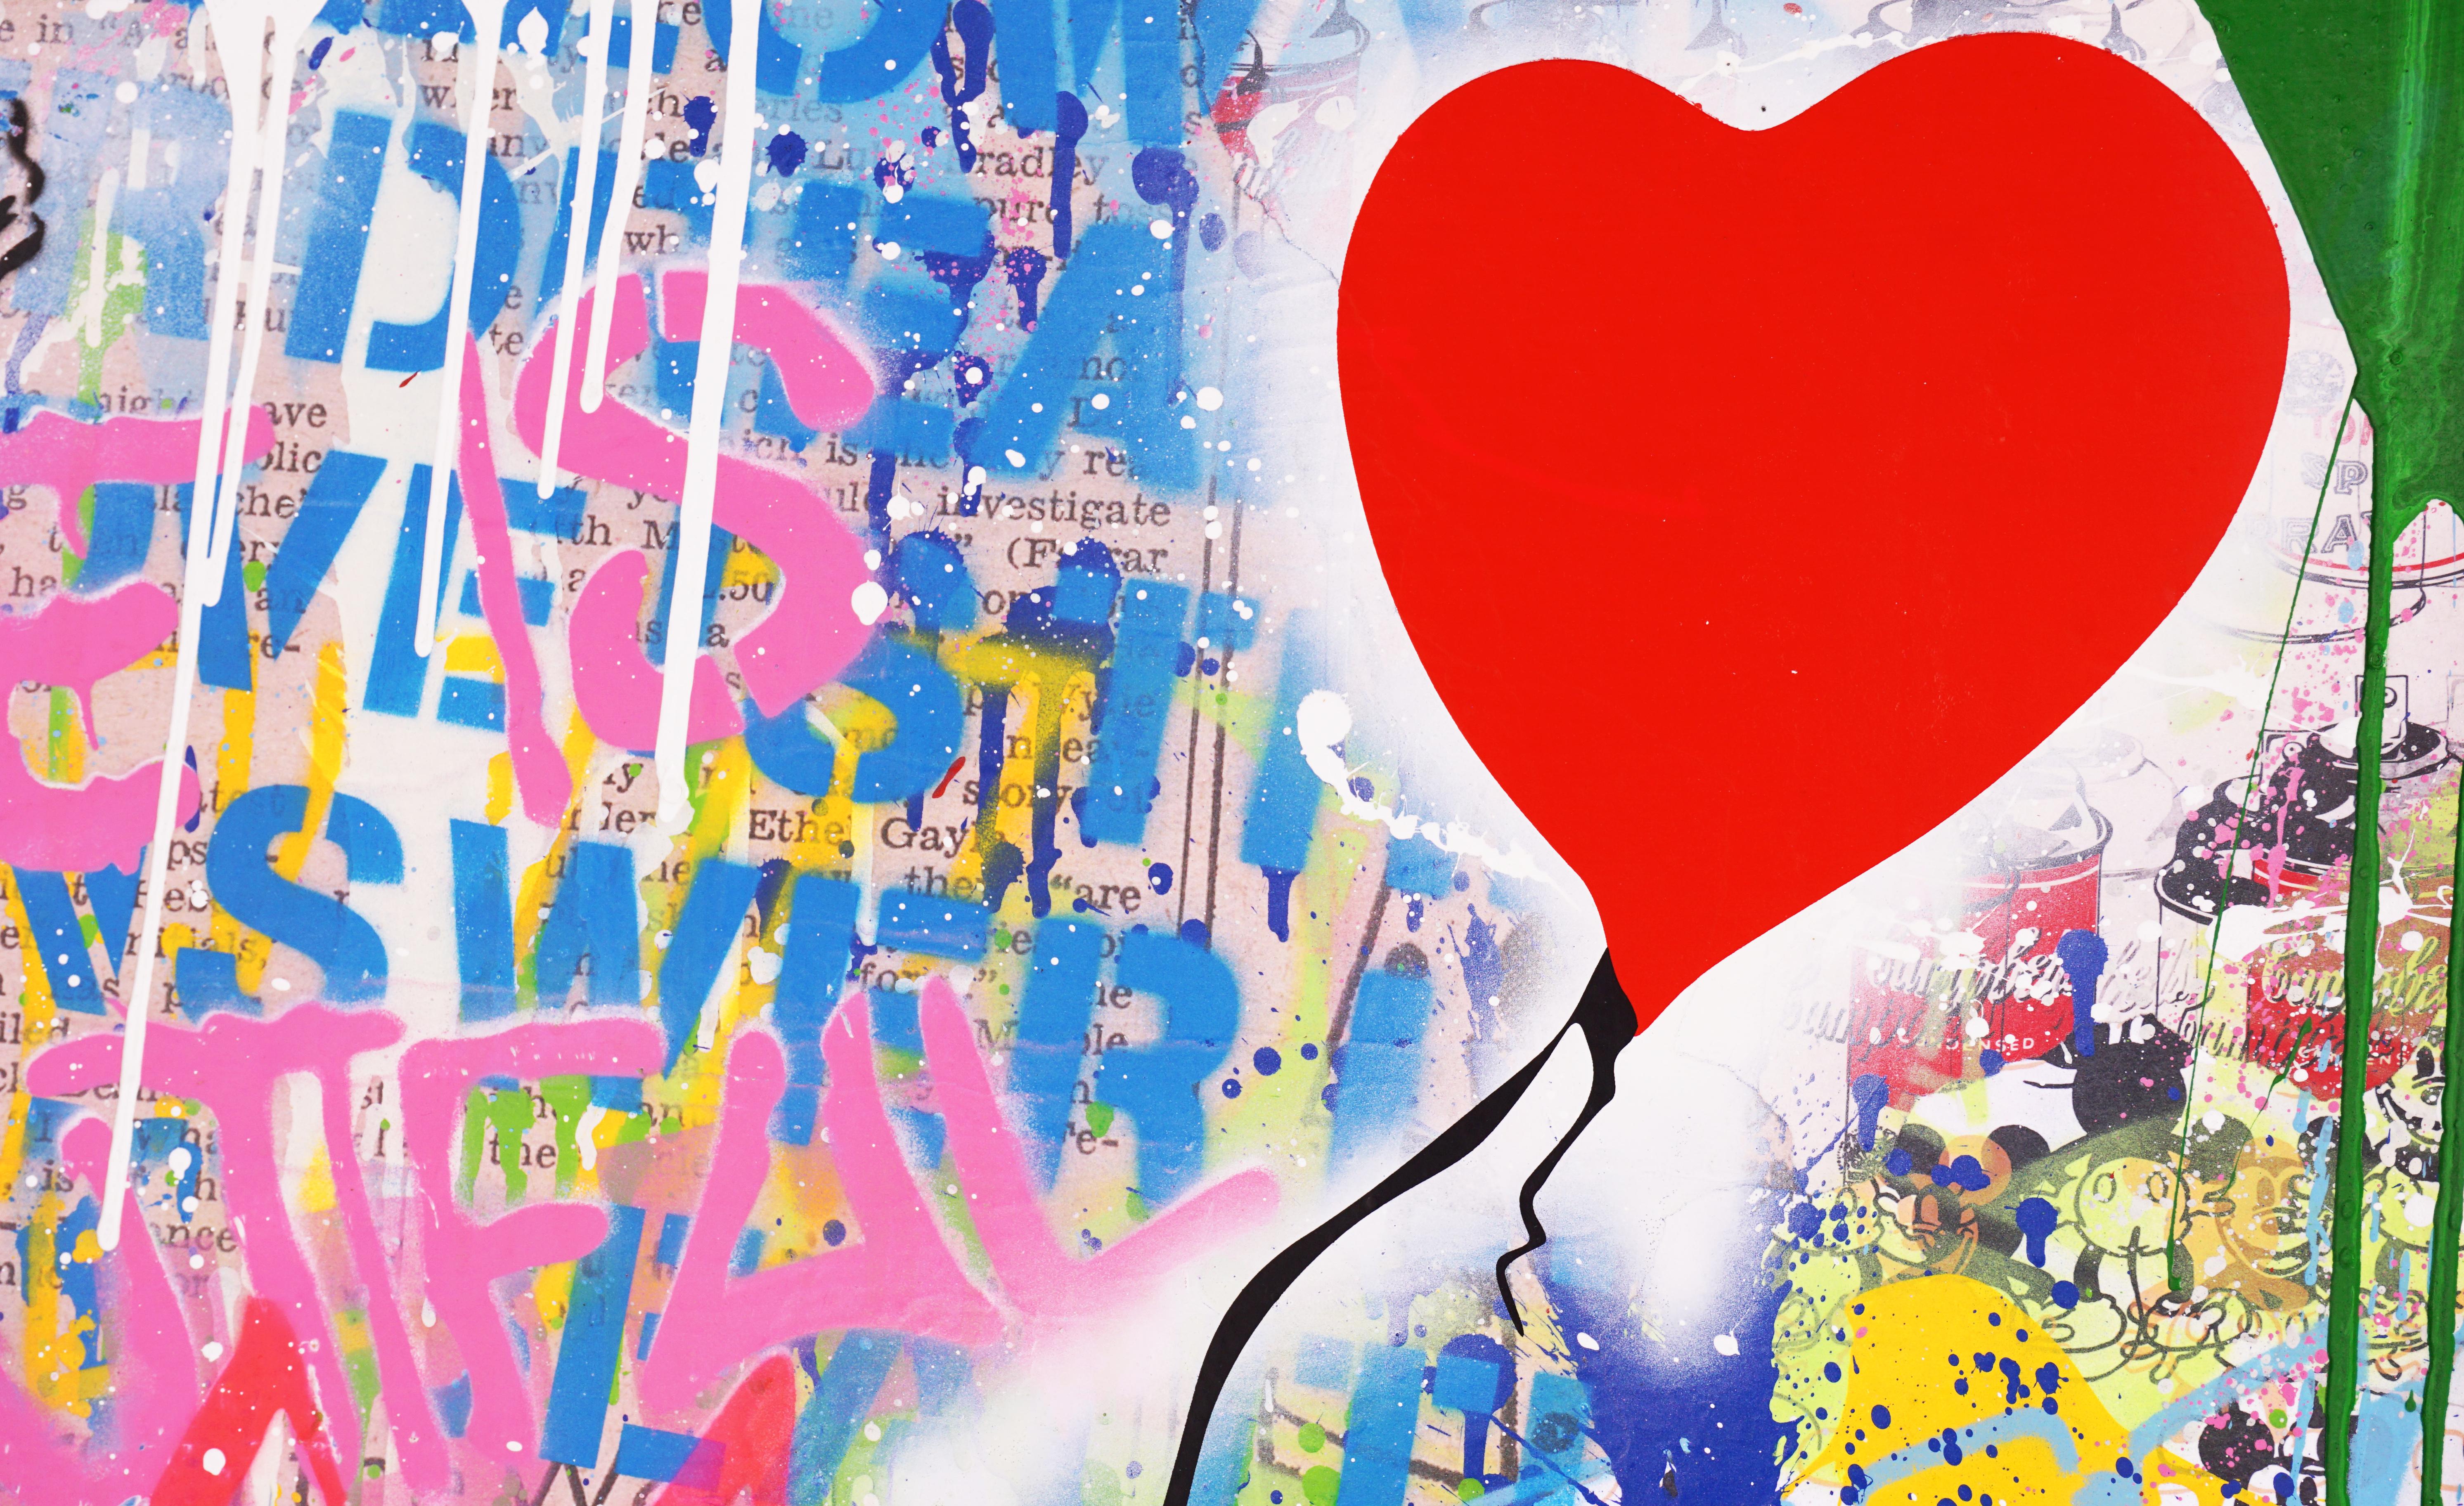 The graffiti street-art meets fine-art 'Balloon Girl' is a pop art painted masterpiece made with layers of acrylic paint, spray painted stencil, and mixed media on paper, created in 2021 by contemporary street-artist, Mr. Brainwash. The bold